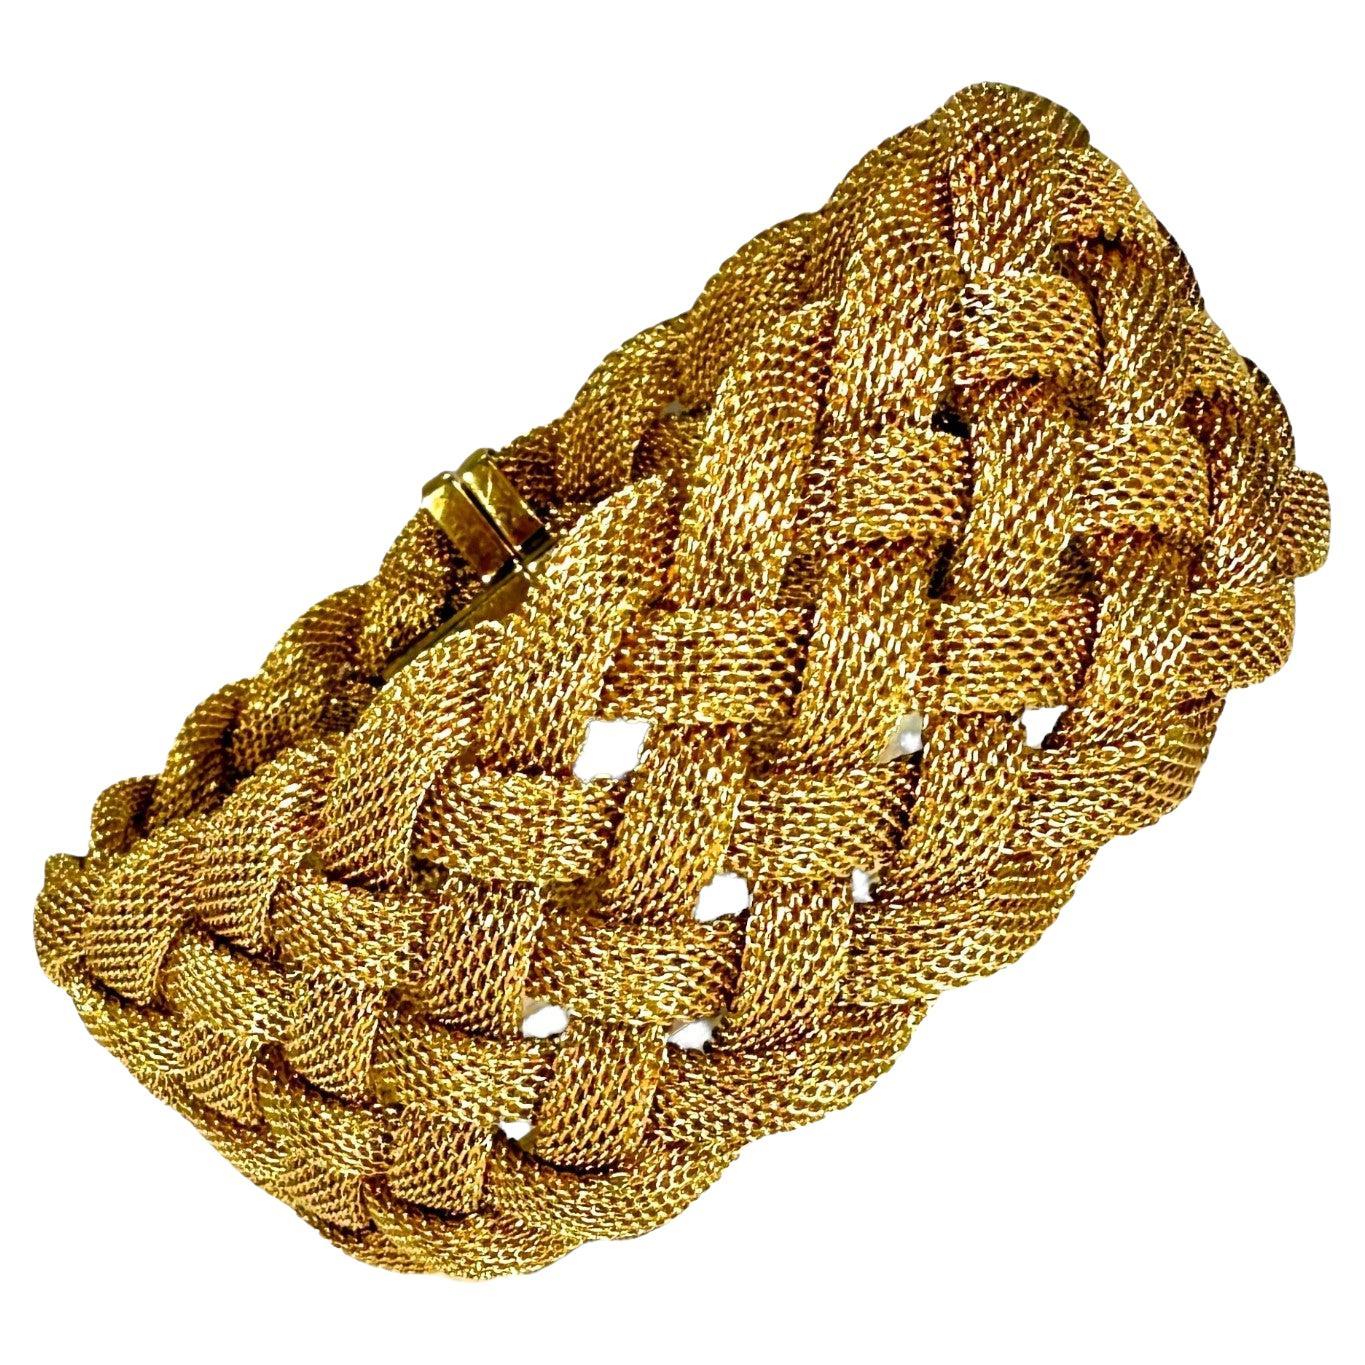 Tiffany & Co. 18k Yellow Gold Woven Mesh Bracelet 1.13 Inches Wide 